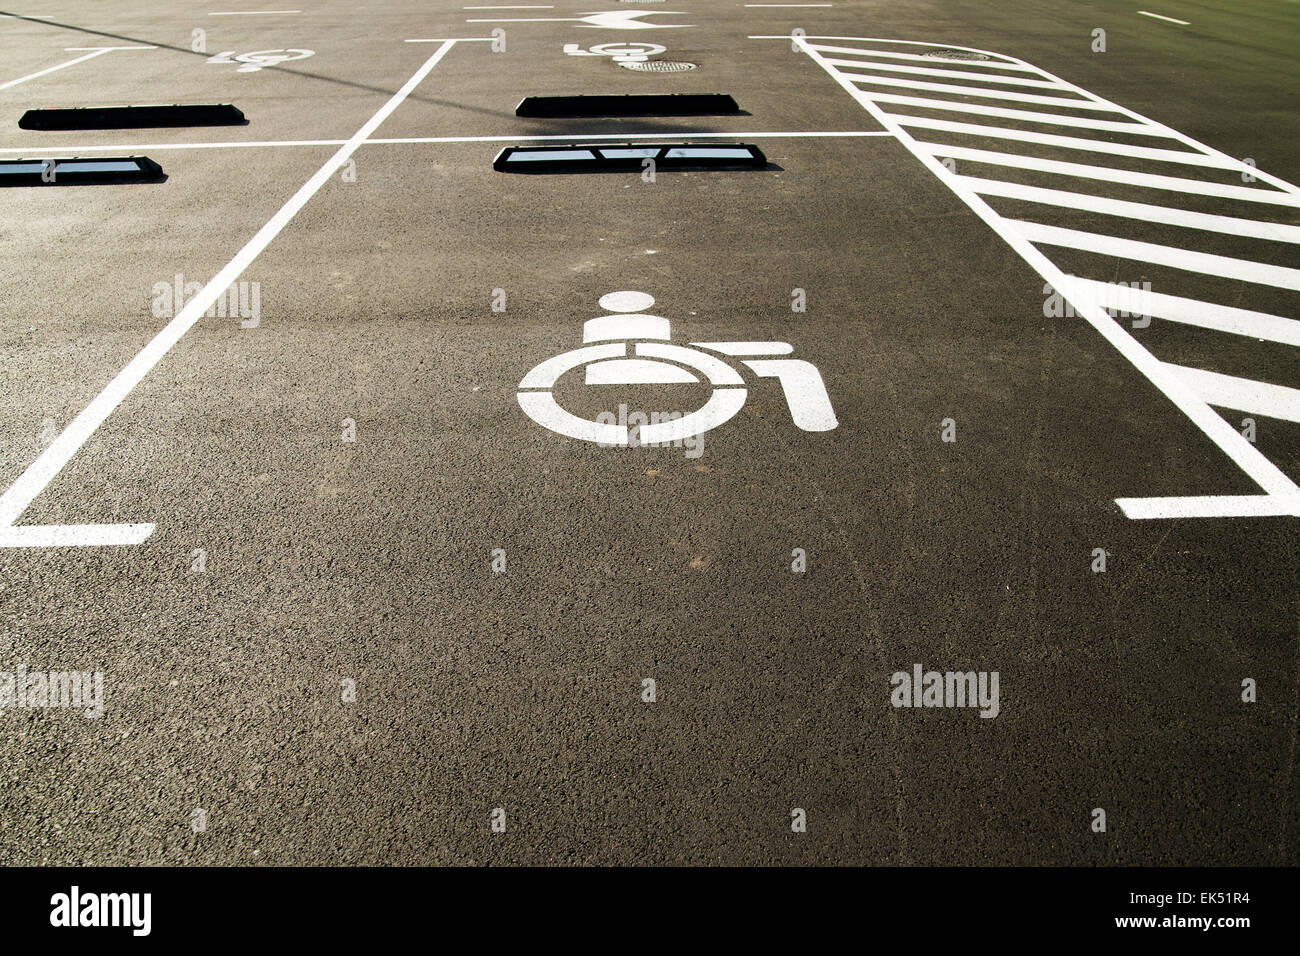 Markings on asphalt indicating a parking space for people with limited opportunities  in the city Stock Photo